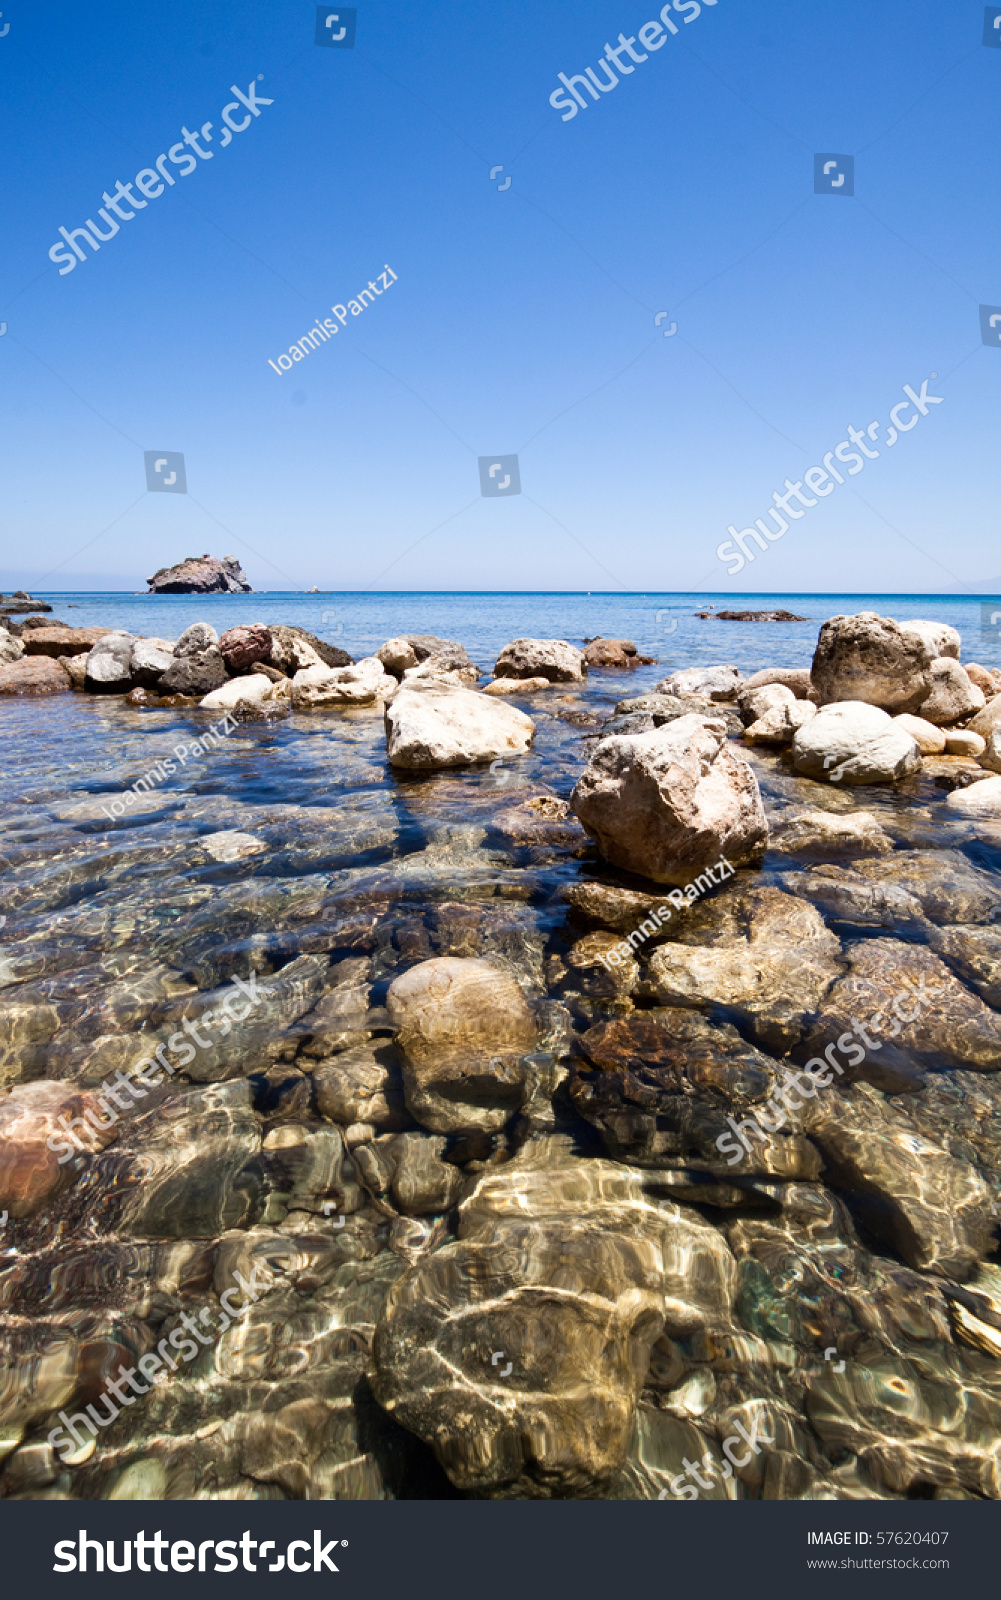 Crystal Clear Water And Rocks Of An Exotic Beach Stock Photo 57620407 ...